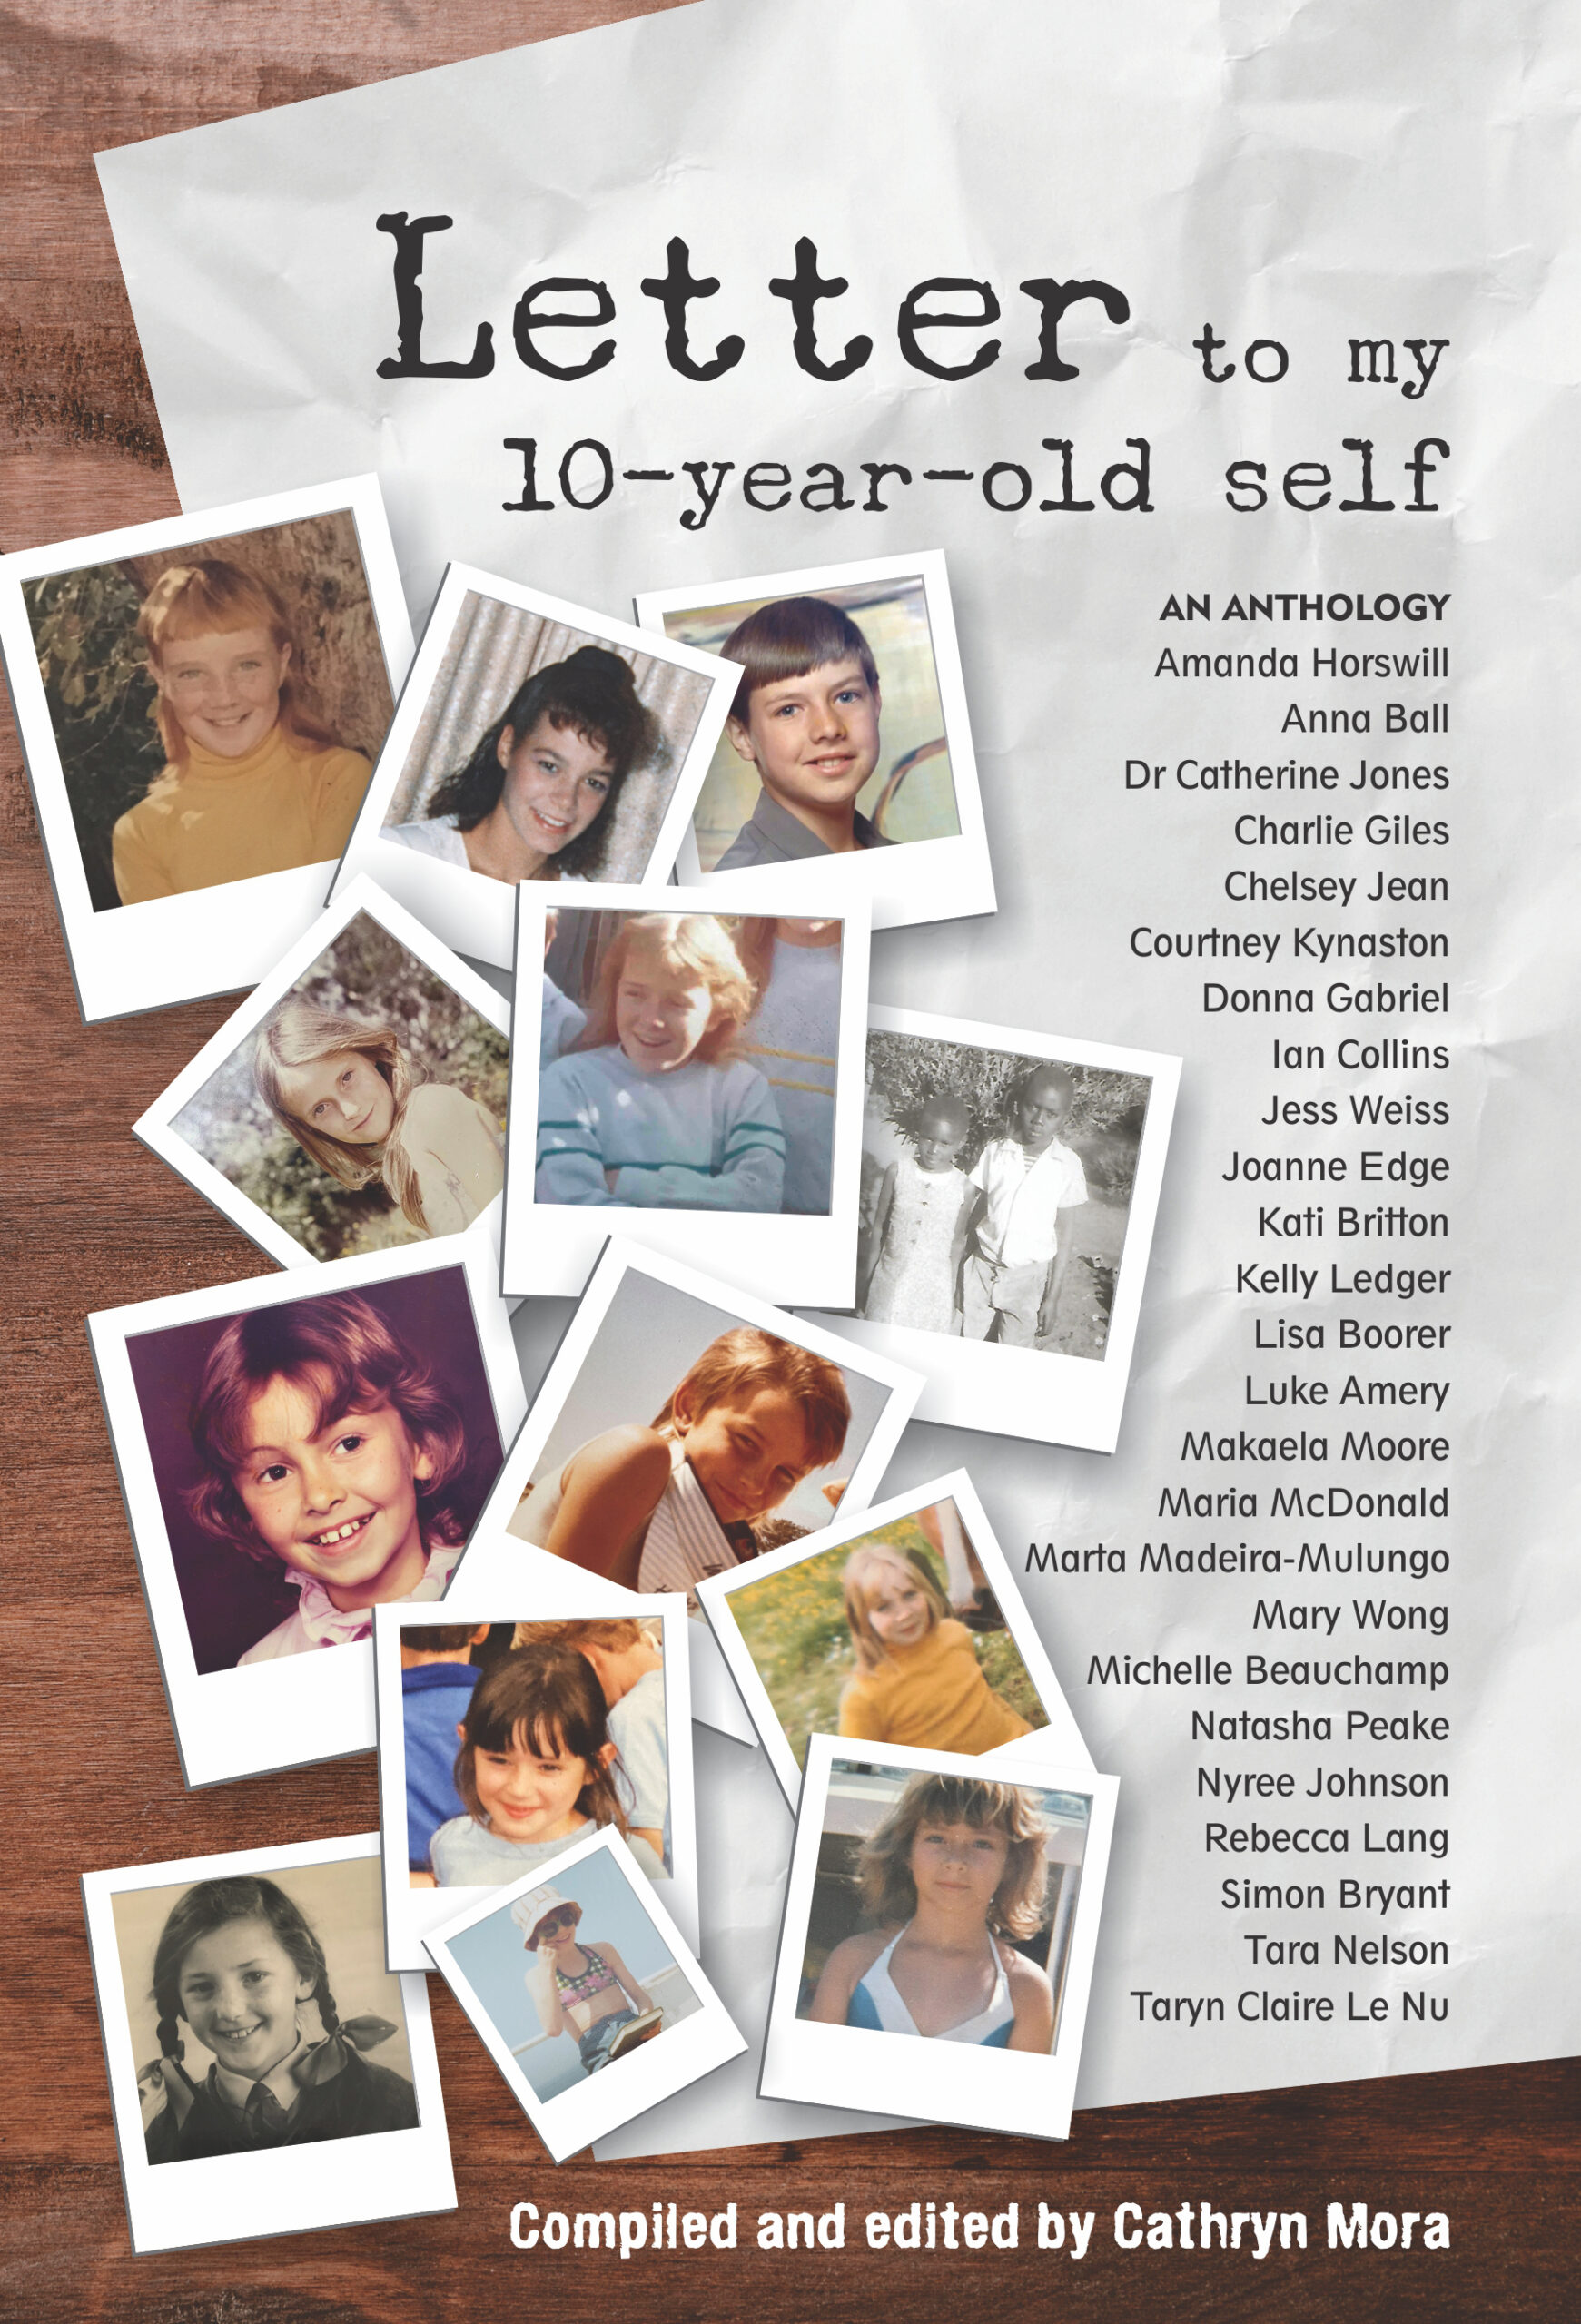 FREE: Letter to my 10-year-old-self by Cathyrn Mora